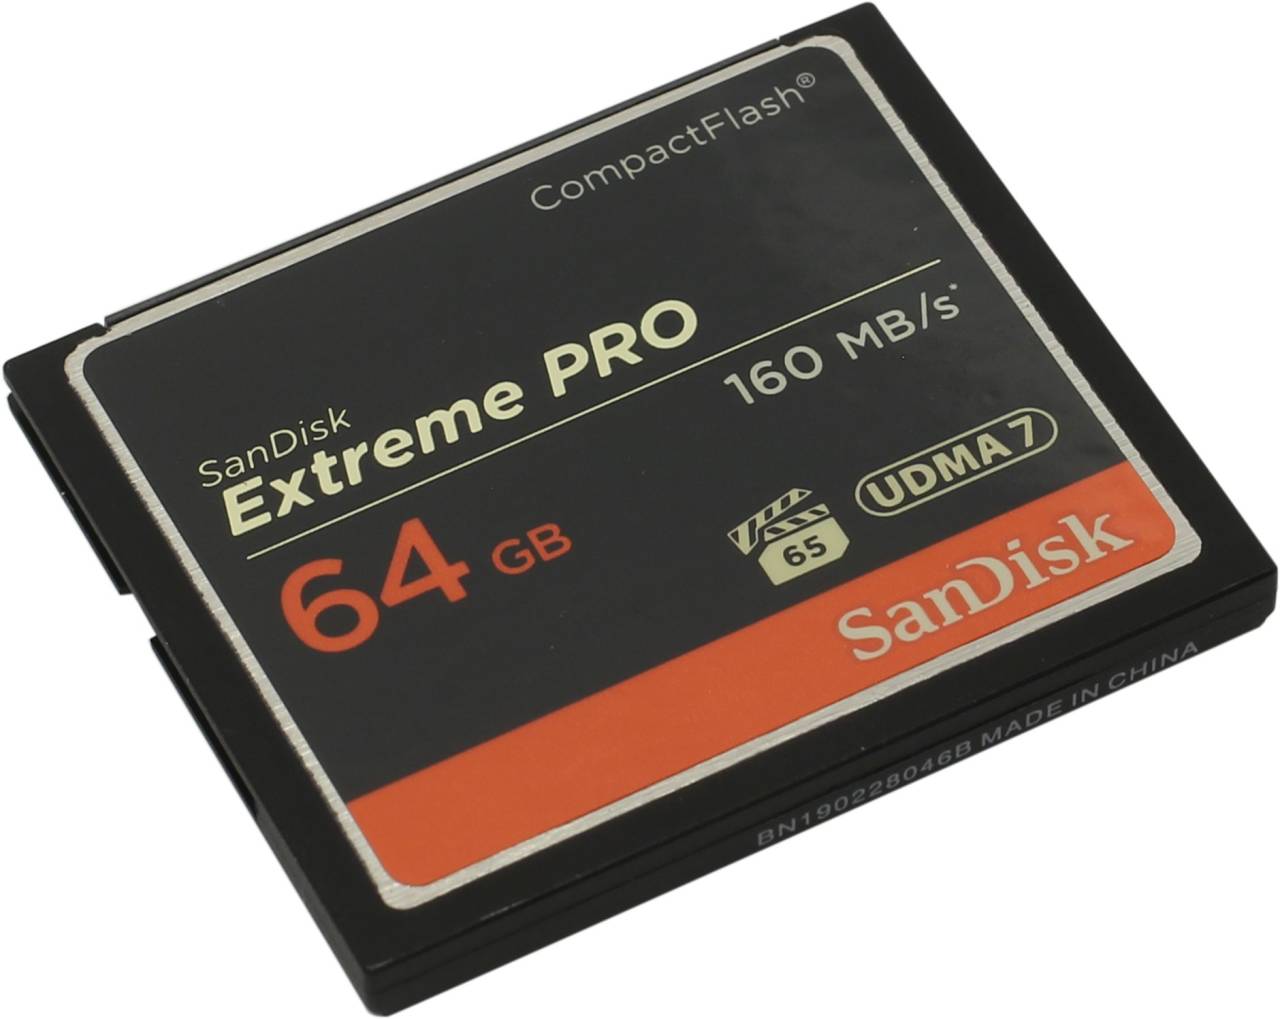    SanDisk Extreme Pro [SDCFXPS-064G-X46] CompactFlash Card 64Gb